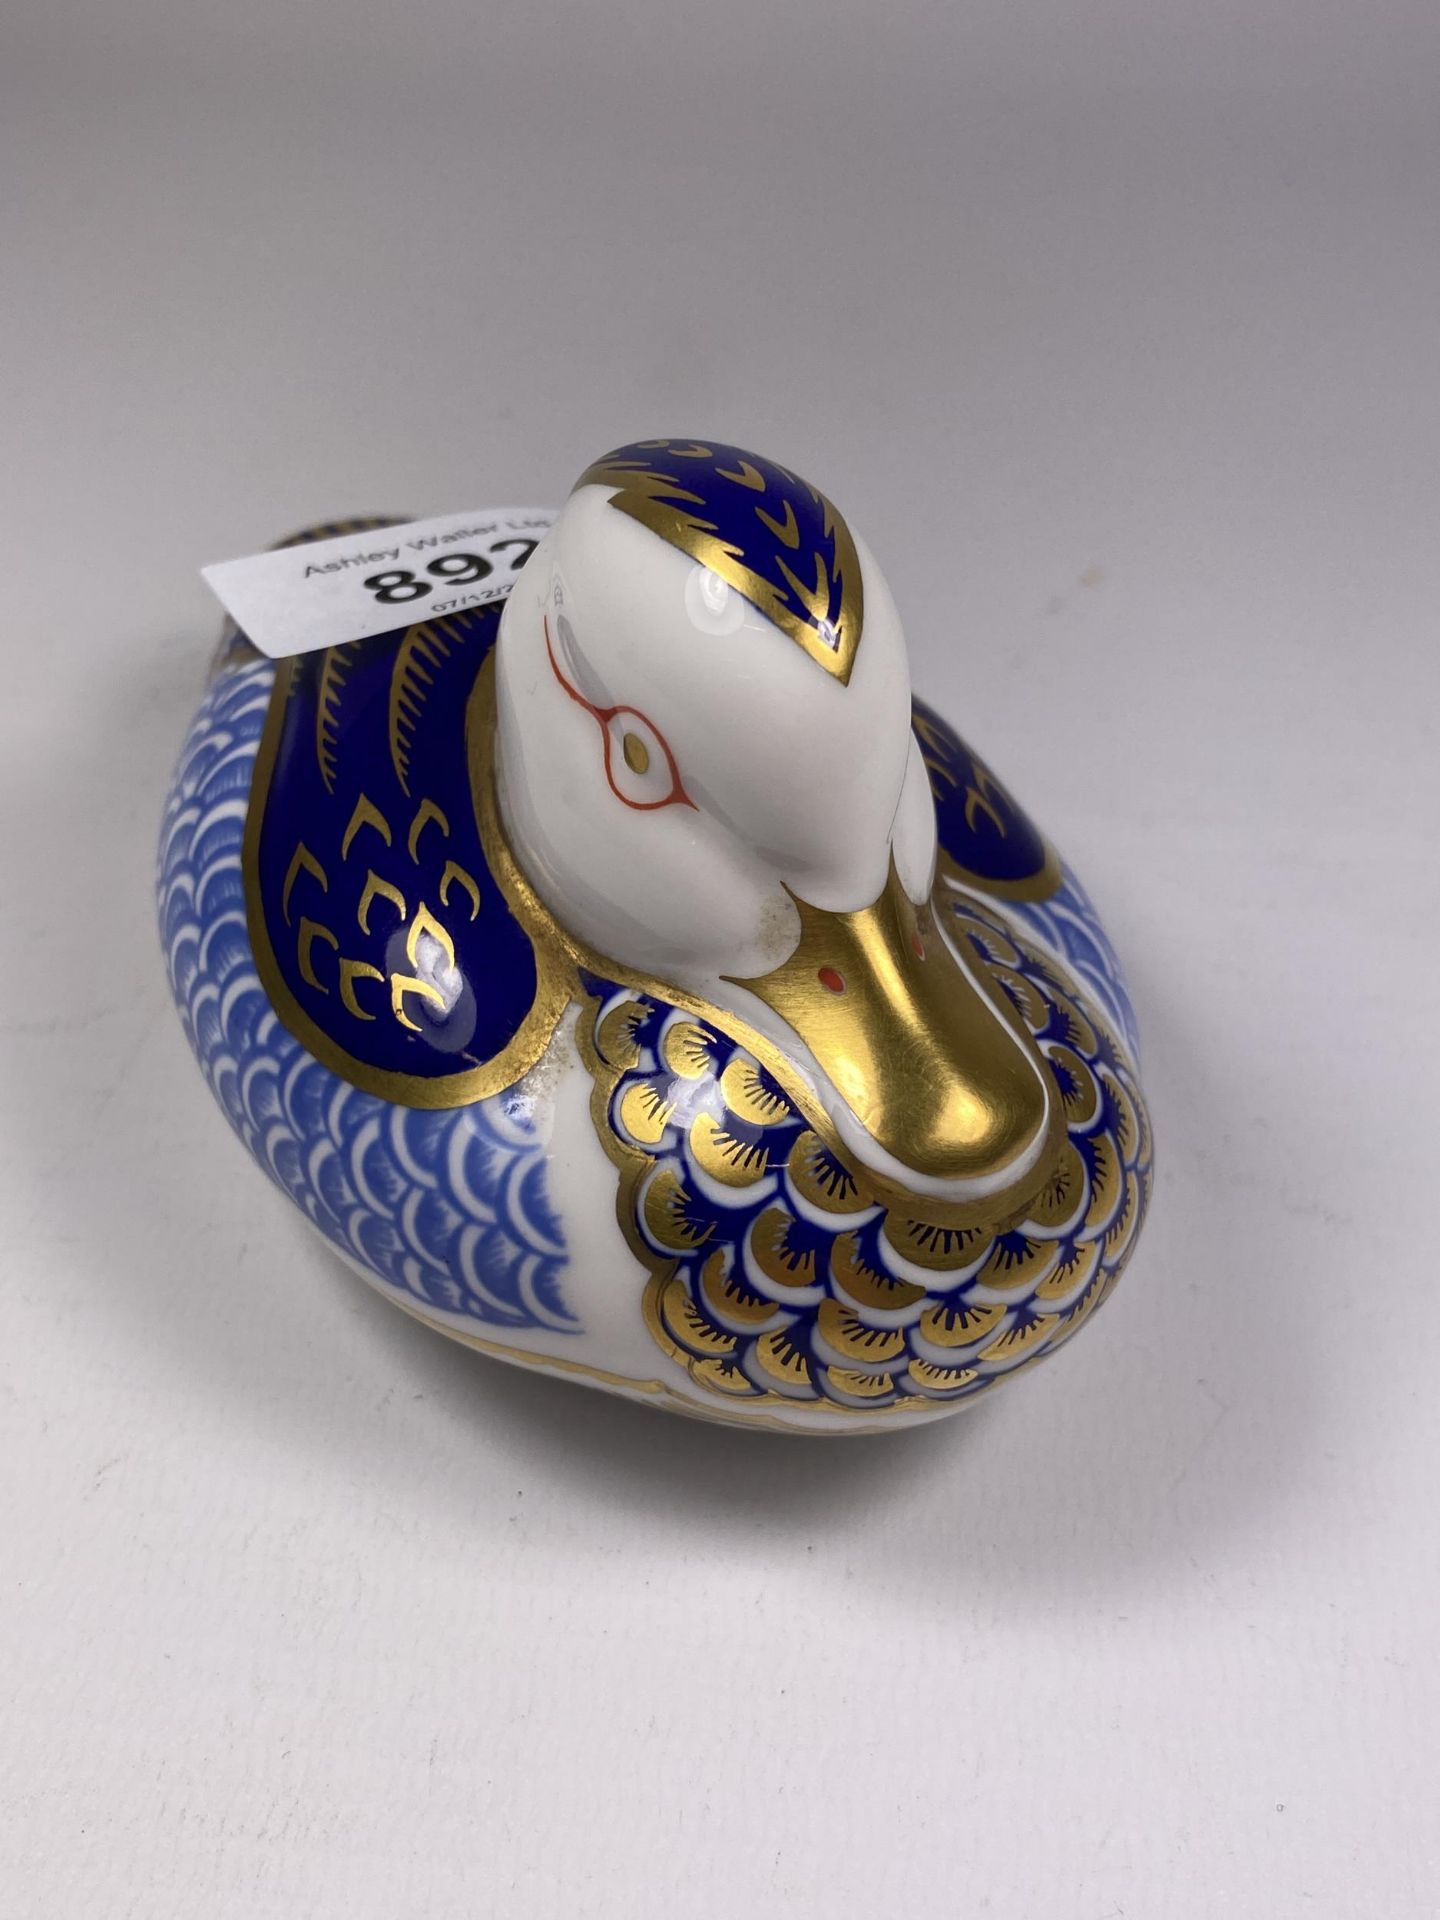 A ROYAL CROWN DERBY DUCK PAPERWEIGHT (NO STOPPER)